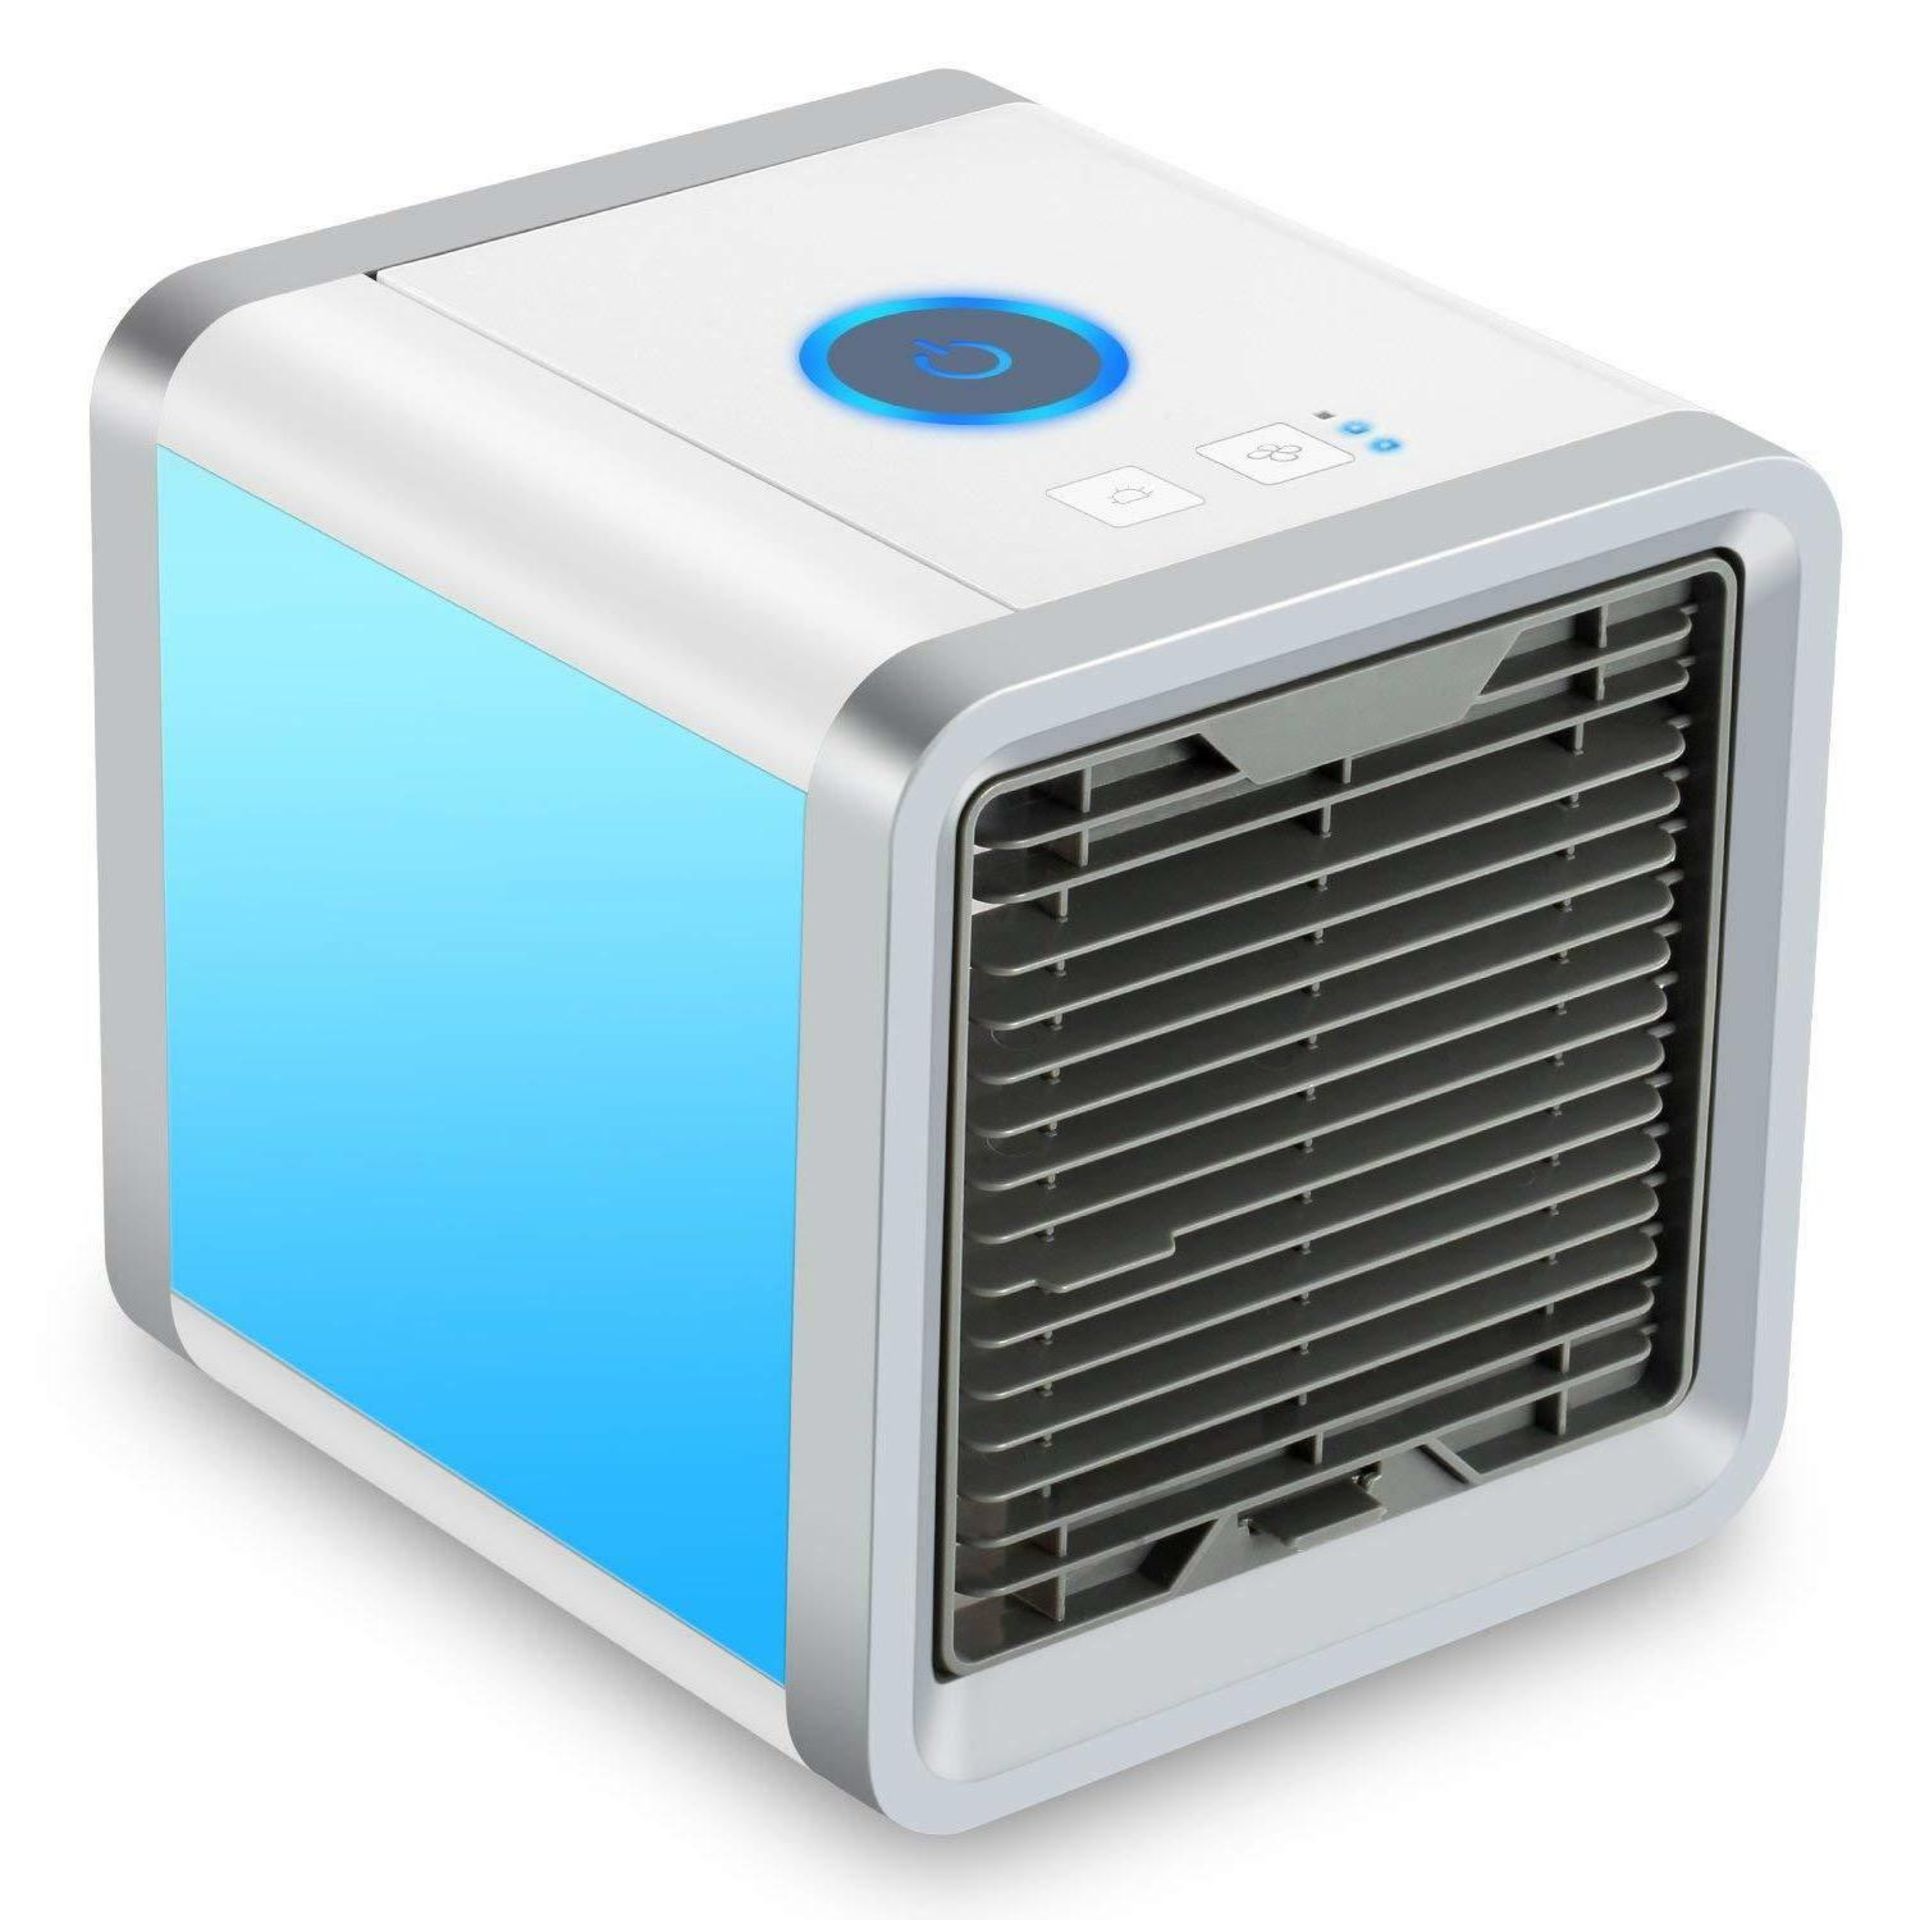 Jiejia cool down evaporative air cooler (Delivery Band A)